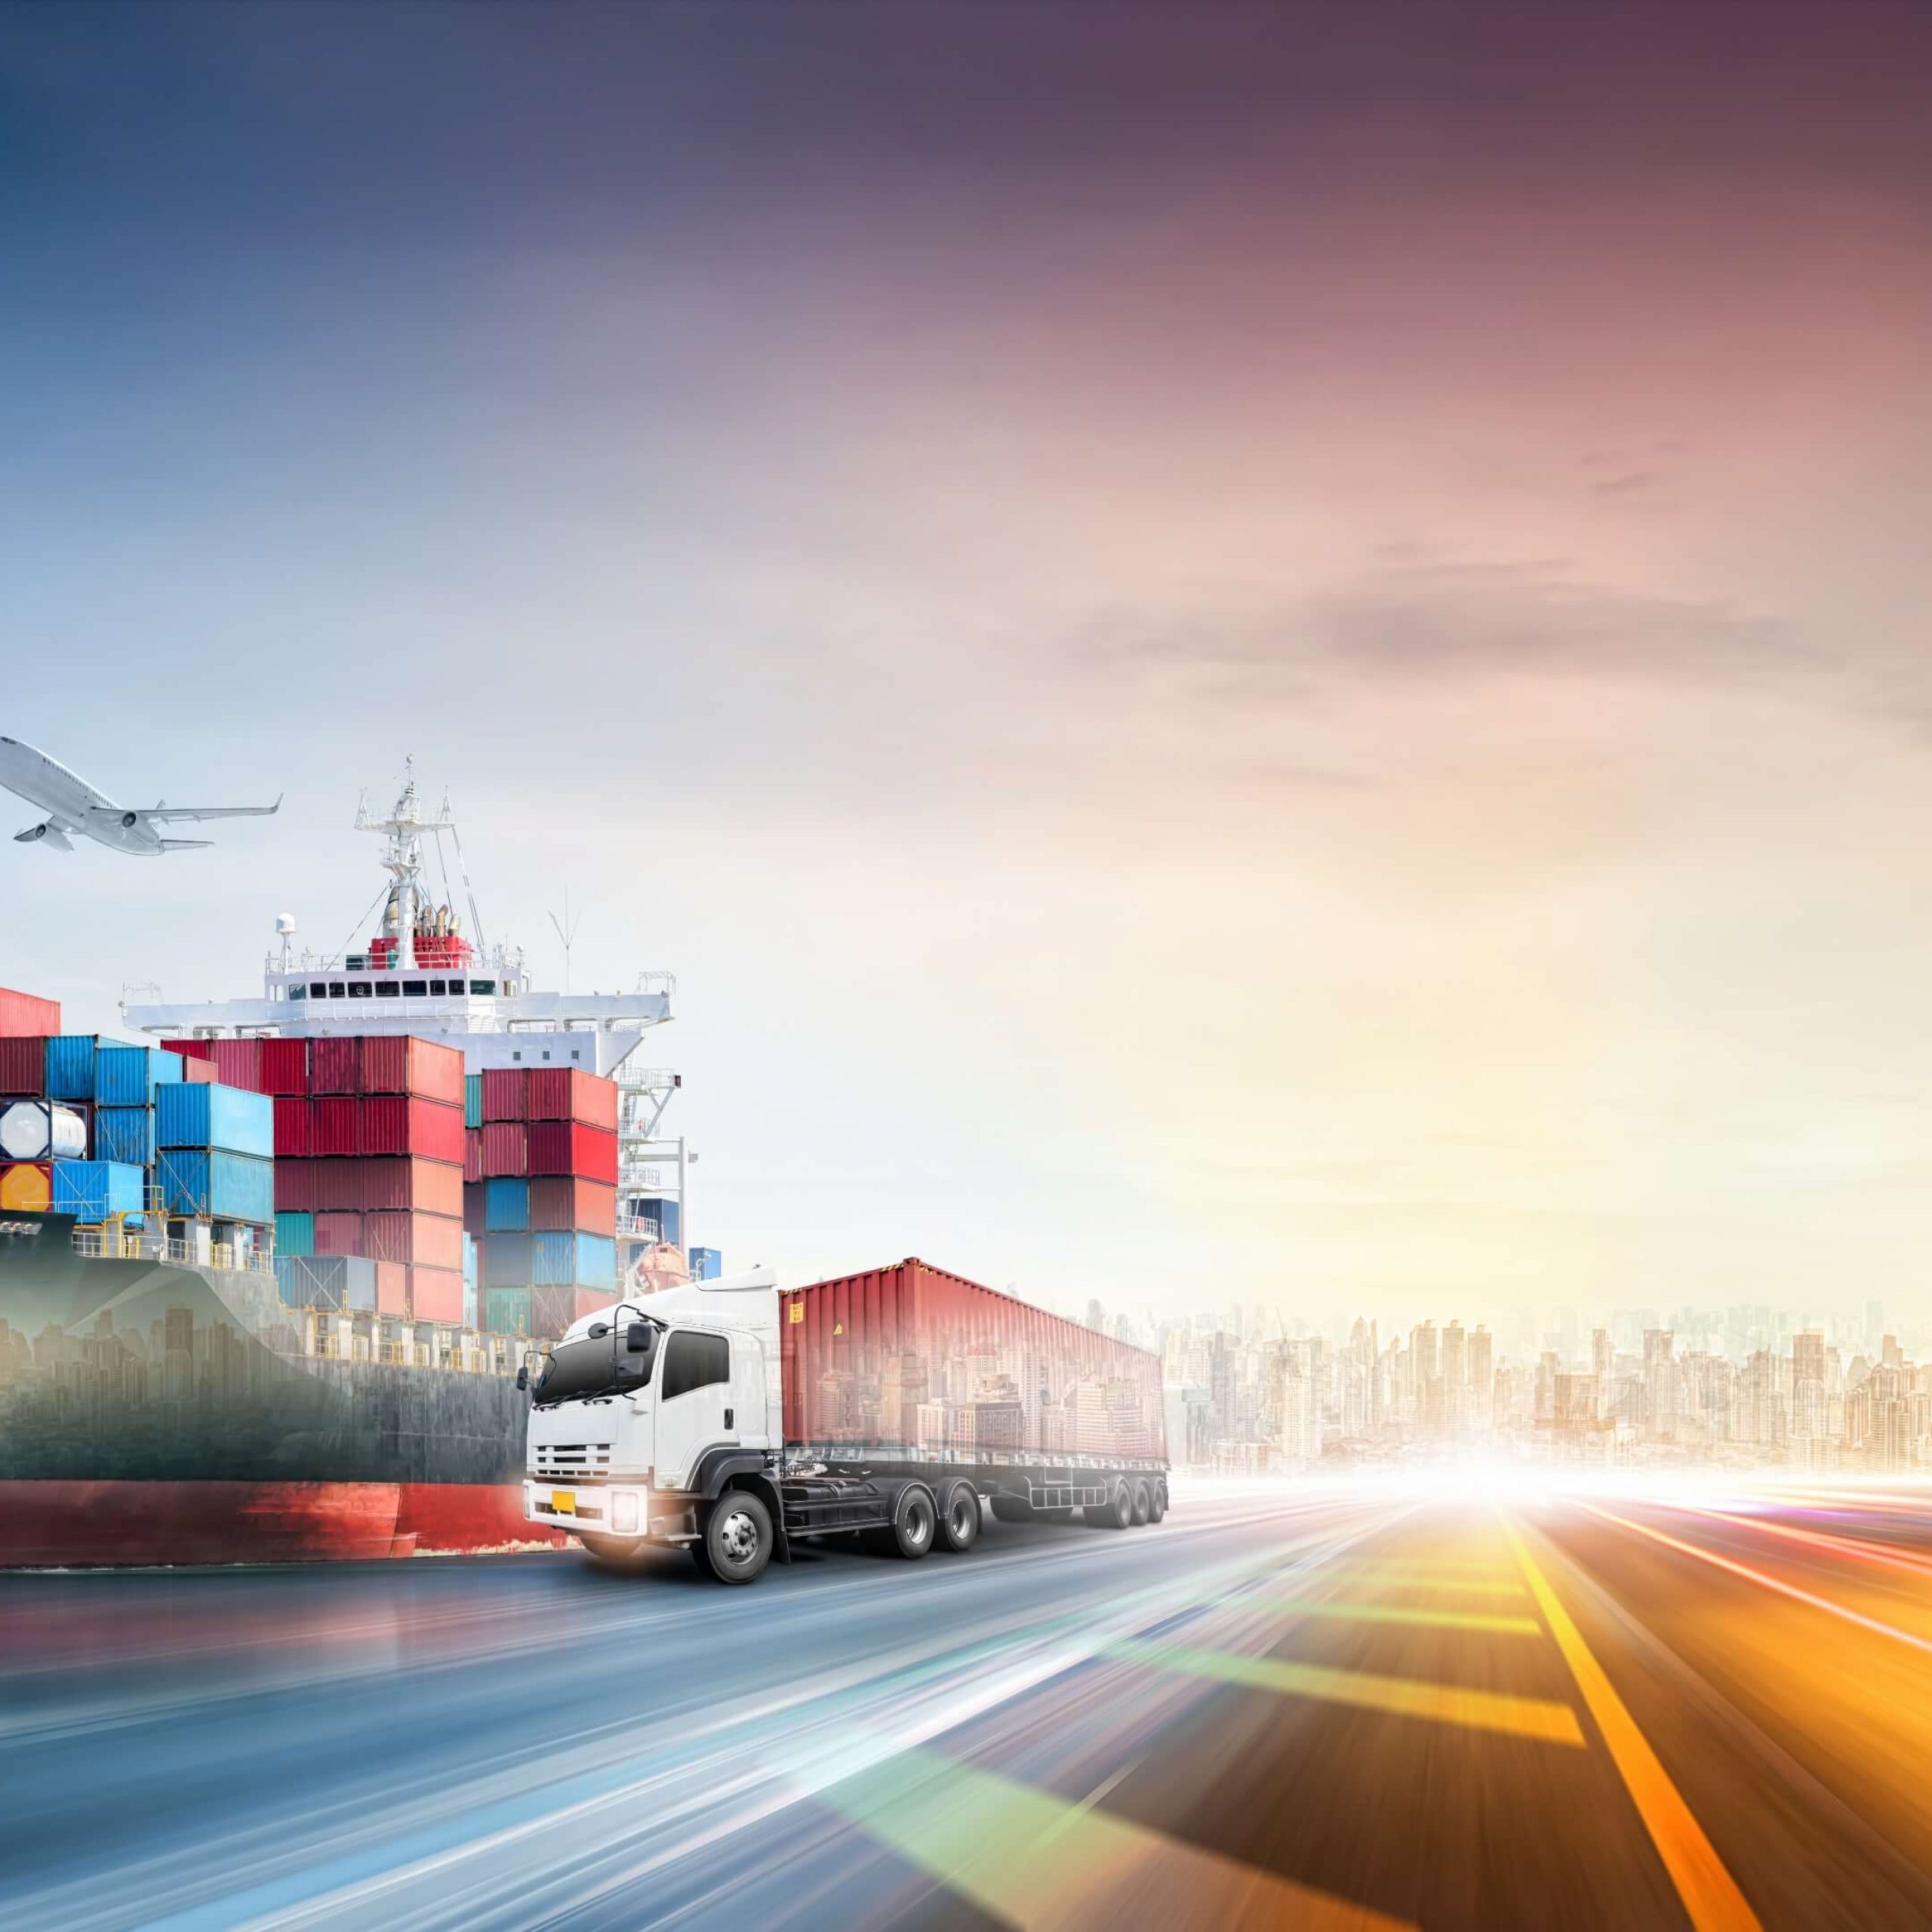 Regulations, Requirements, Tariffs, Taxes: Everything You Need to Know About Importing Goods Into the UK